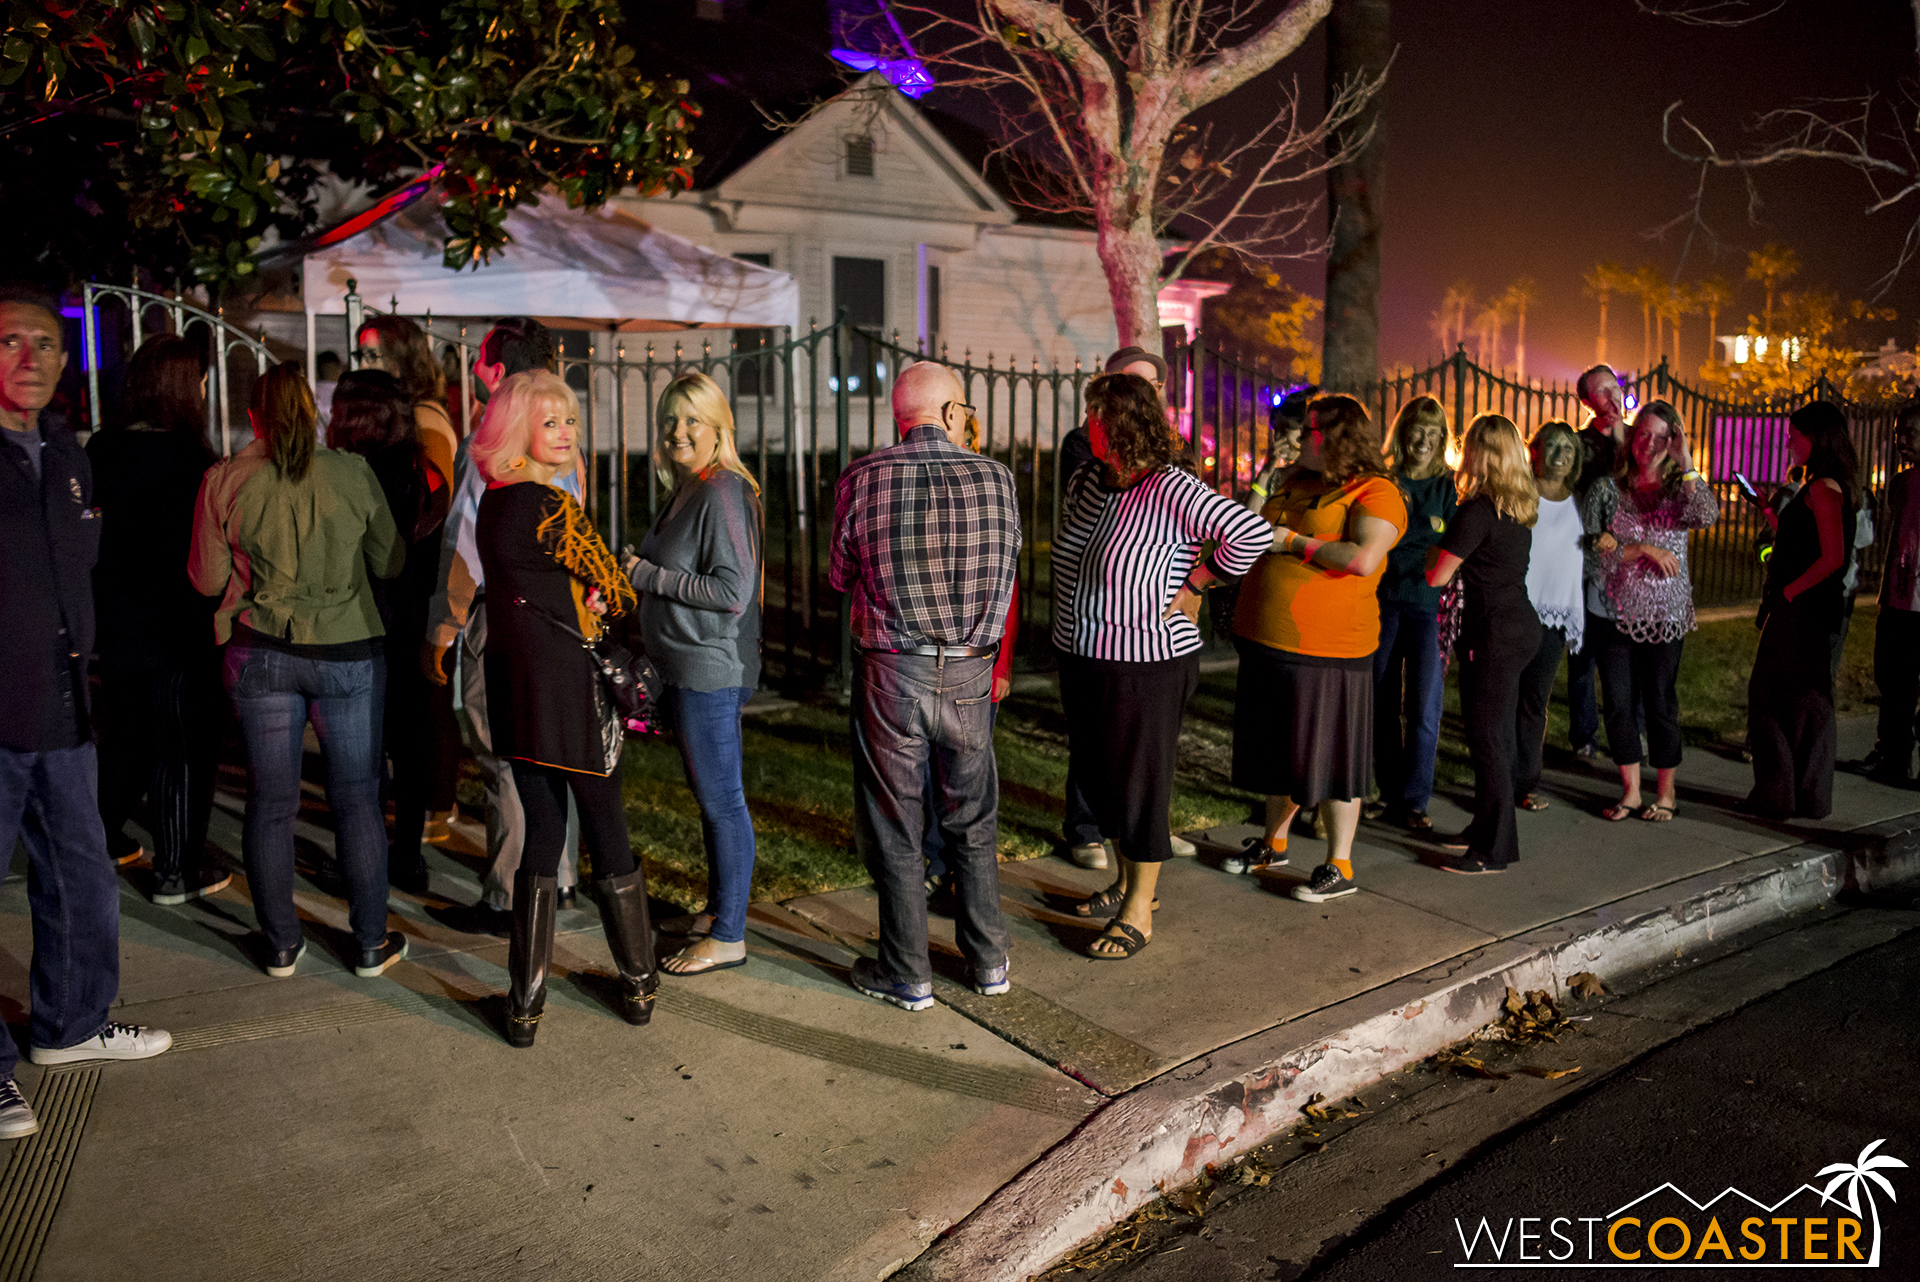  The four-night event proved to be pretty popular, with regular waits. 